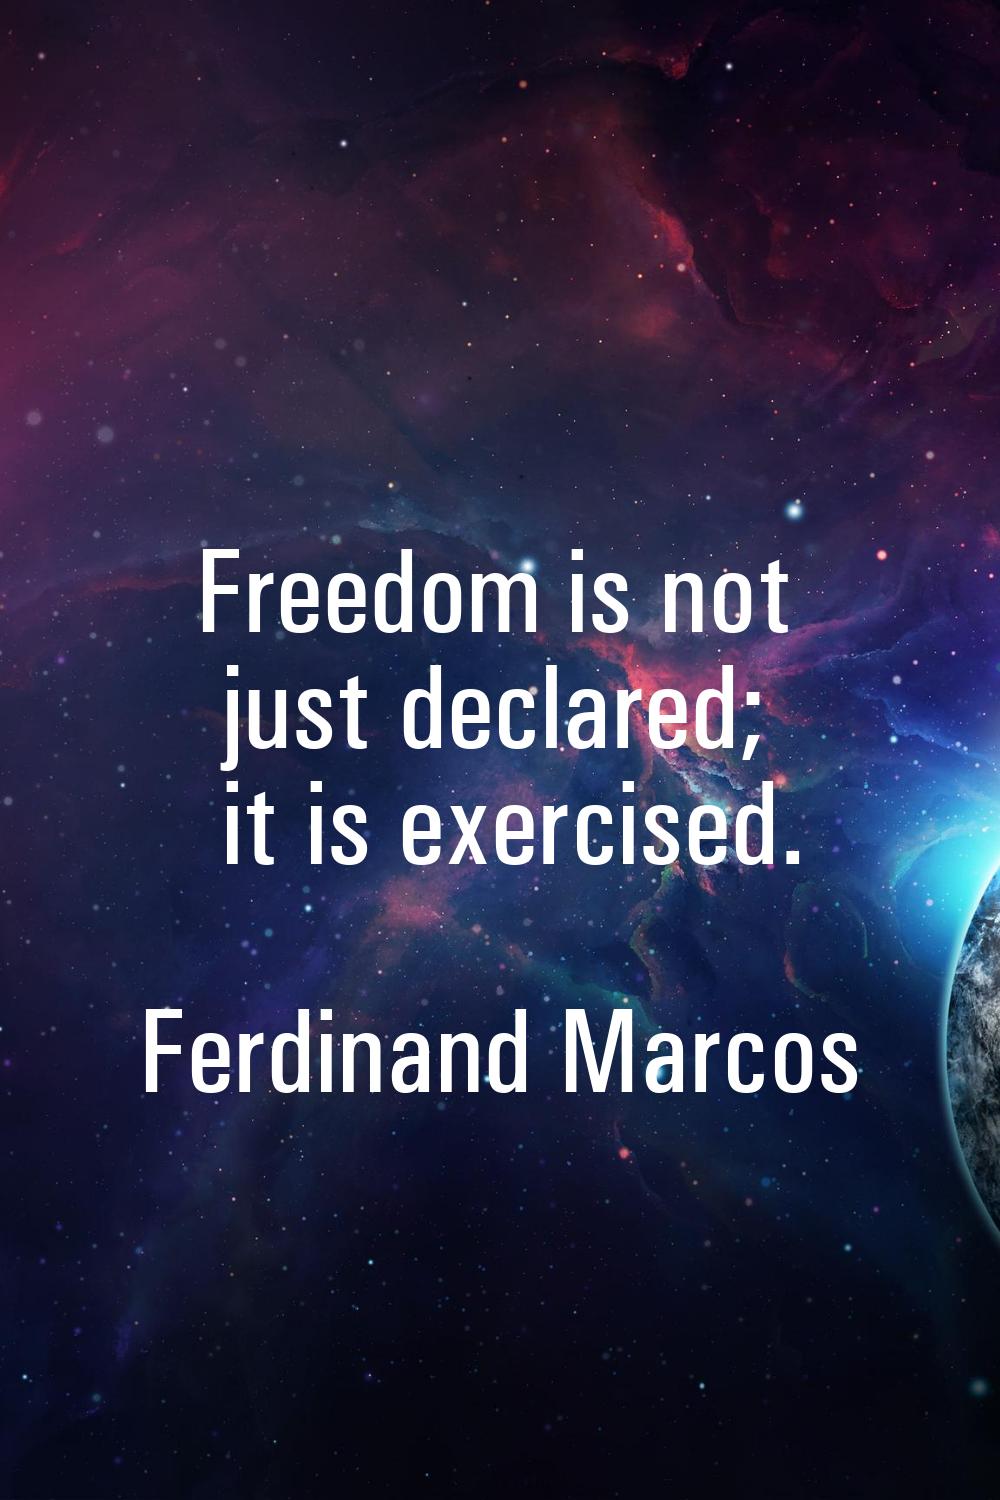 Freedom is not just declared; it is exercised.